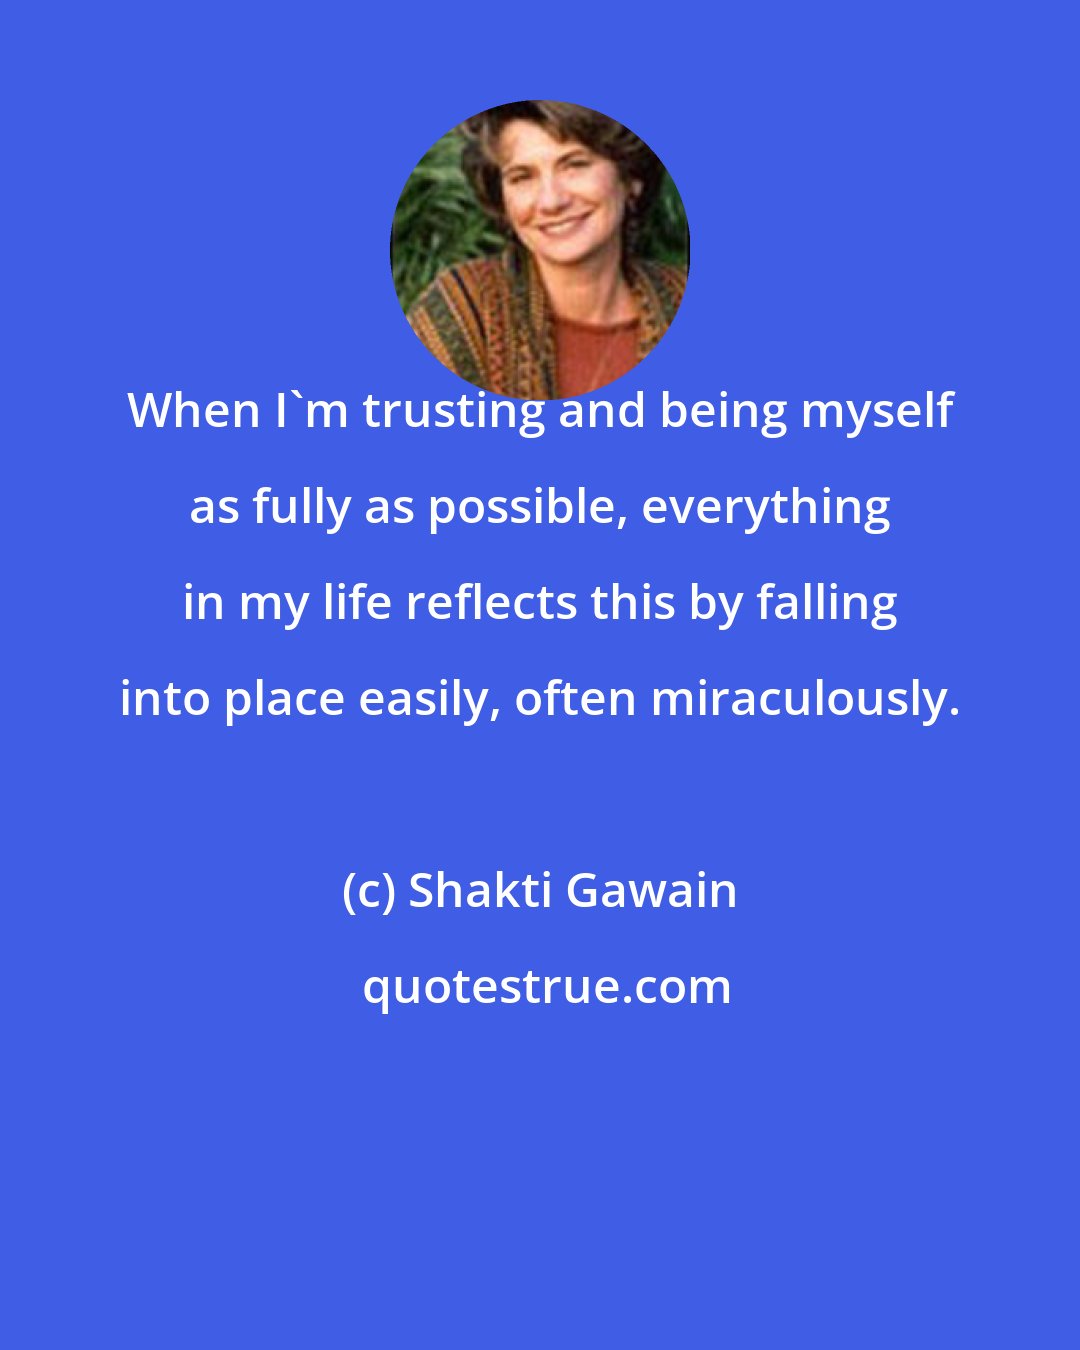 Shakti Gawain: When I'm trusting and being myself as fully as possible, everything in my life reflects this by falling into place easily, often miraculously.